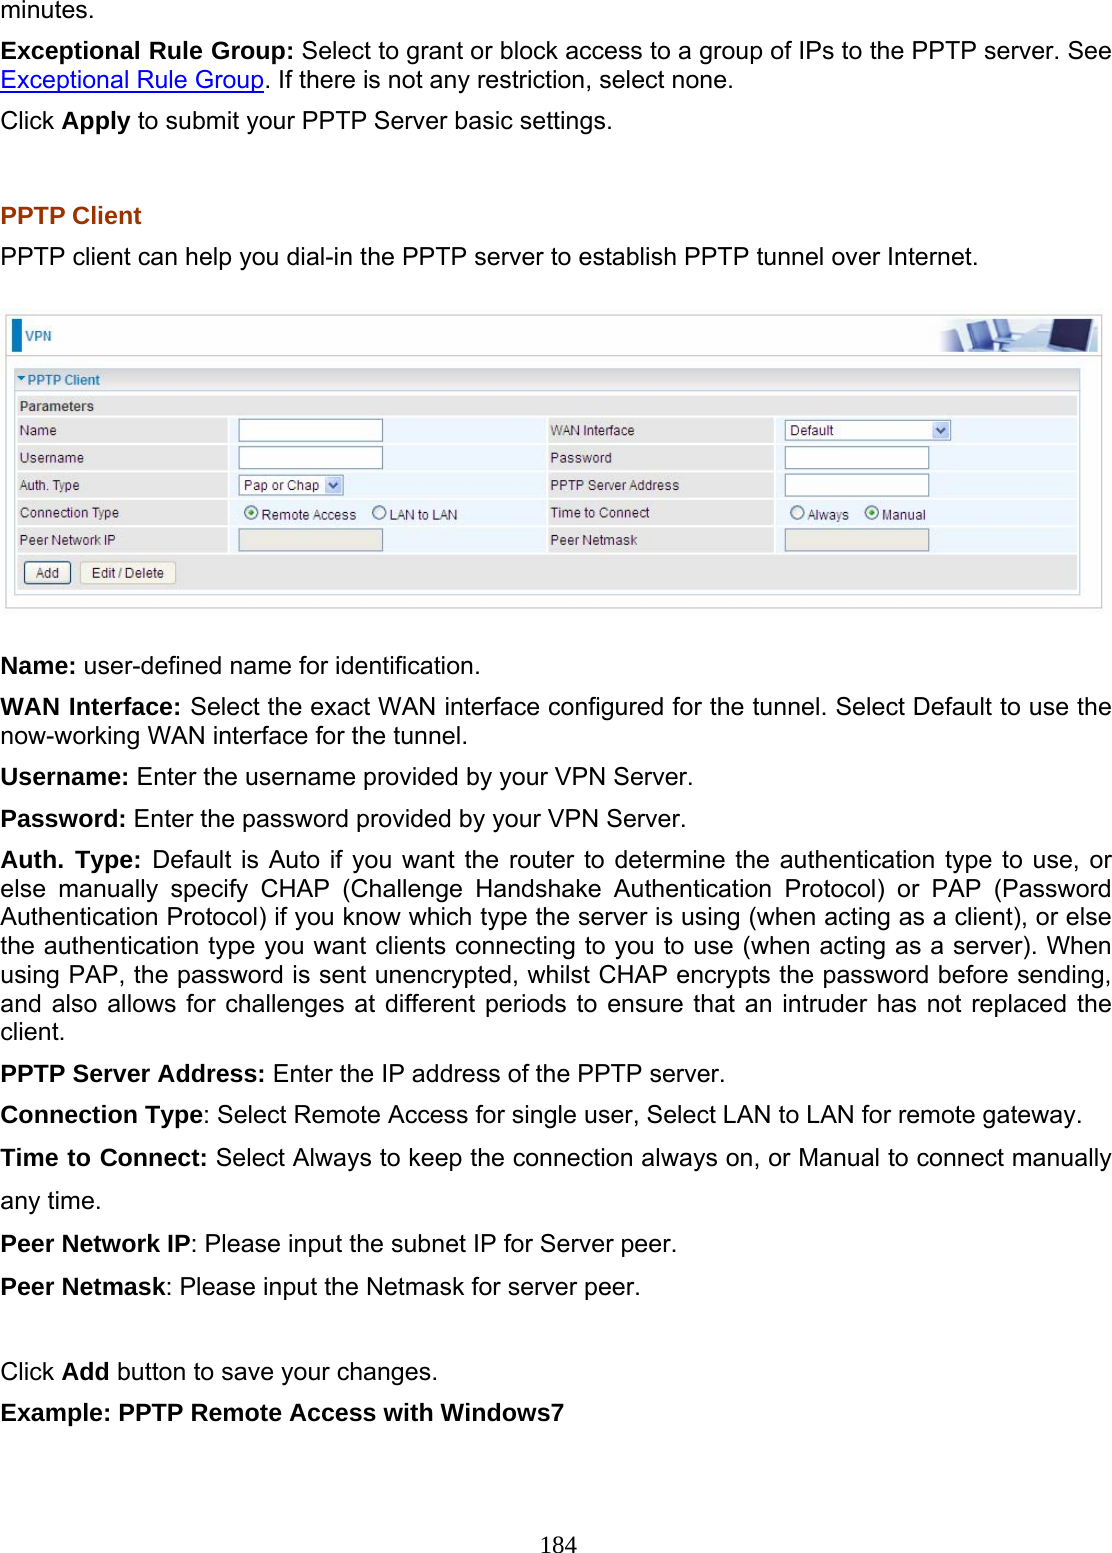 184 minutes. Exceptional Rule Group: Select to grant or block access to a group of IPs to the PPTP server. See Exceptional Rule Group. If there is not any restriction, select none. Click Apply to submit your PPTP Server basic settings.  PPTP Client PPTP client can help you dial-in the PPTP server to establish PPTP tunnel over Internet.  Name: user-defined name for identification. WAN Interface: Select the exact WAN interface configured for the tunnel. Select Default to use the now-working WAN interface for the tunnel. Username: Enter the username provided by your VPN Server. Password: Enter the password provided by your VPN Server.  Auth. Type: Default is Auto if you want the router to determine the authentication type to use, or else manually specify CHAP (Challenge Handshake Authentication Protocol) or PAP (Password Authentication Protocol) if you know which type the server is using (when acting as a client), or else the authentication type you want clients connecting to you to use (when acting as a server). When using PAP, the password is sent unencrypted, whilst CHAP encrypts the password before sending, and also allows for challenges at different periods to ensure that an intruder has not replaced the client. PPTP Server Address: Enter the IP address of the PPTP server. Connection Type: Select Remote Access for single user, Select LAN to LAN for remote gateway. Time to Connect: Select Always to keep the connection always on, or Manual to connect manually any time. Peer Network IP: Please input the subnet IP for Server peer. Peer Netmask: Please input the Netmask for server peer.  Click Add button to save your changes. Example: PPTP Remote Access with Windows7  